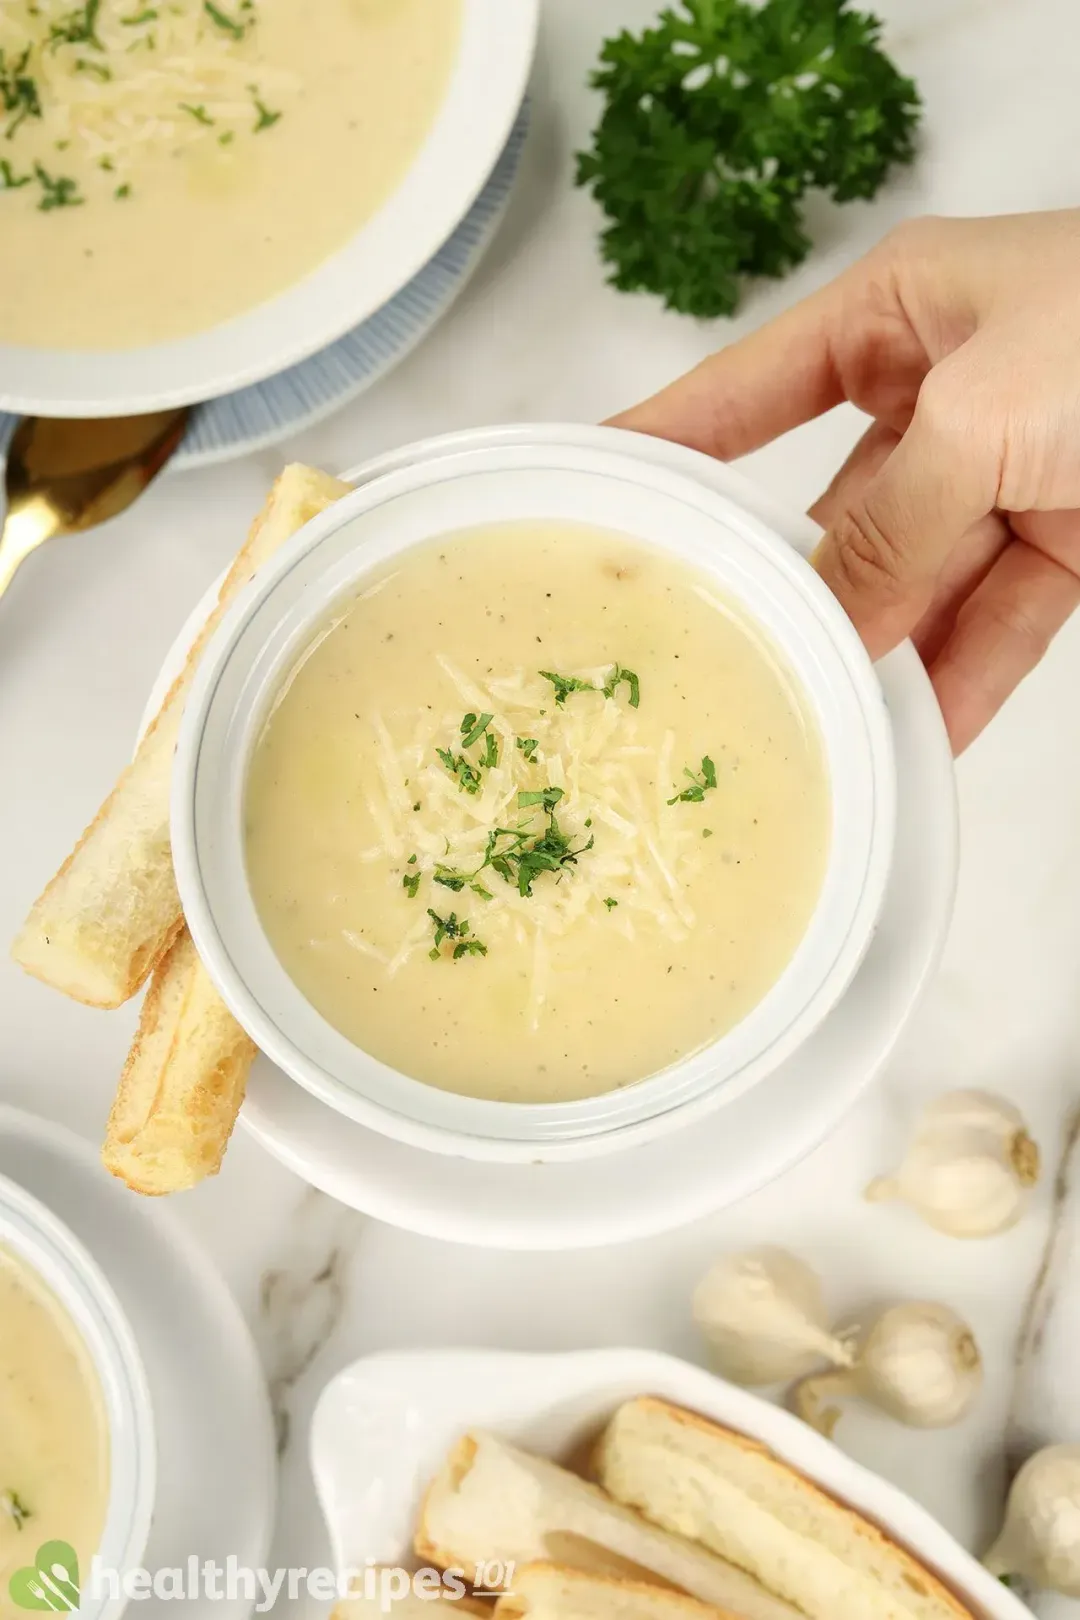 How to Store and Reheat Garlic Soup